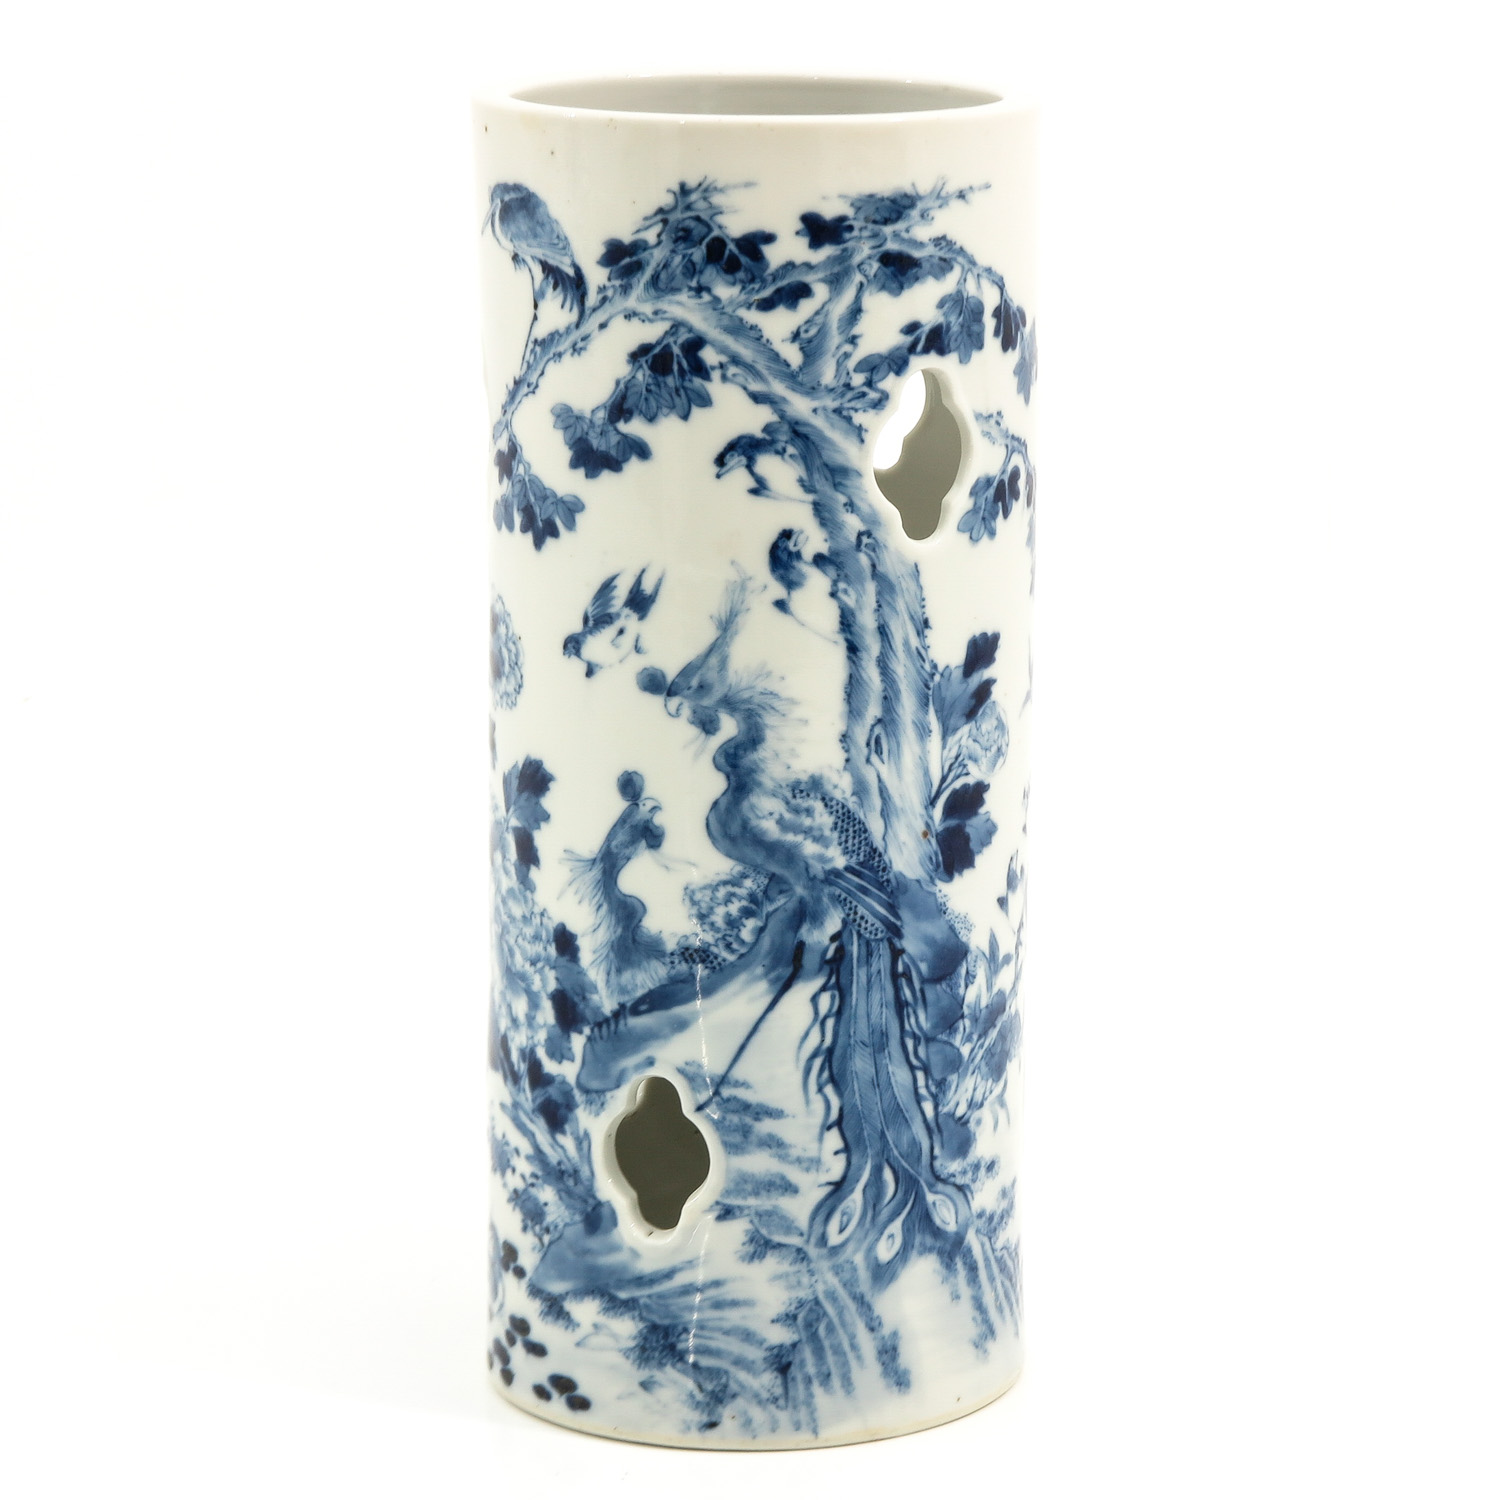 A Blue and White Hat Vase